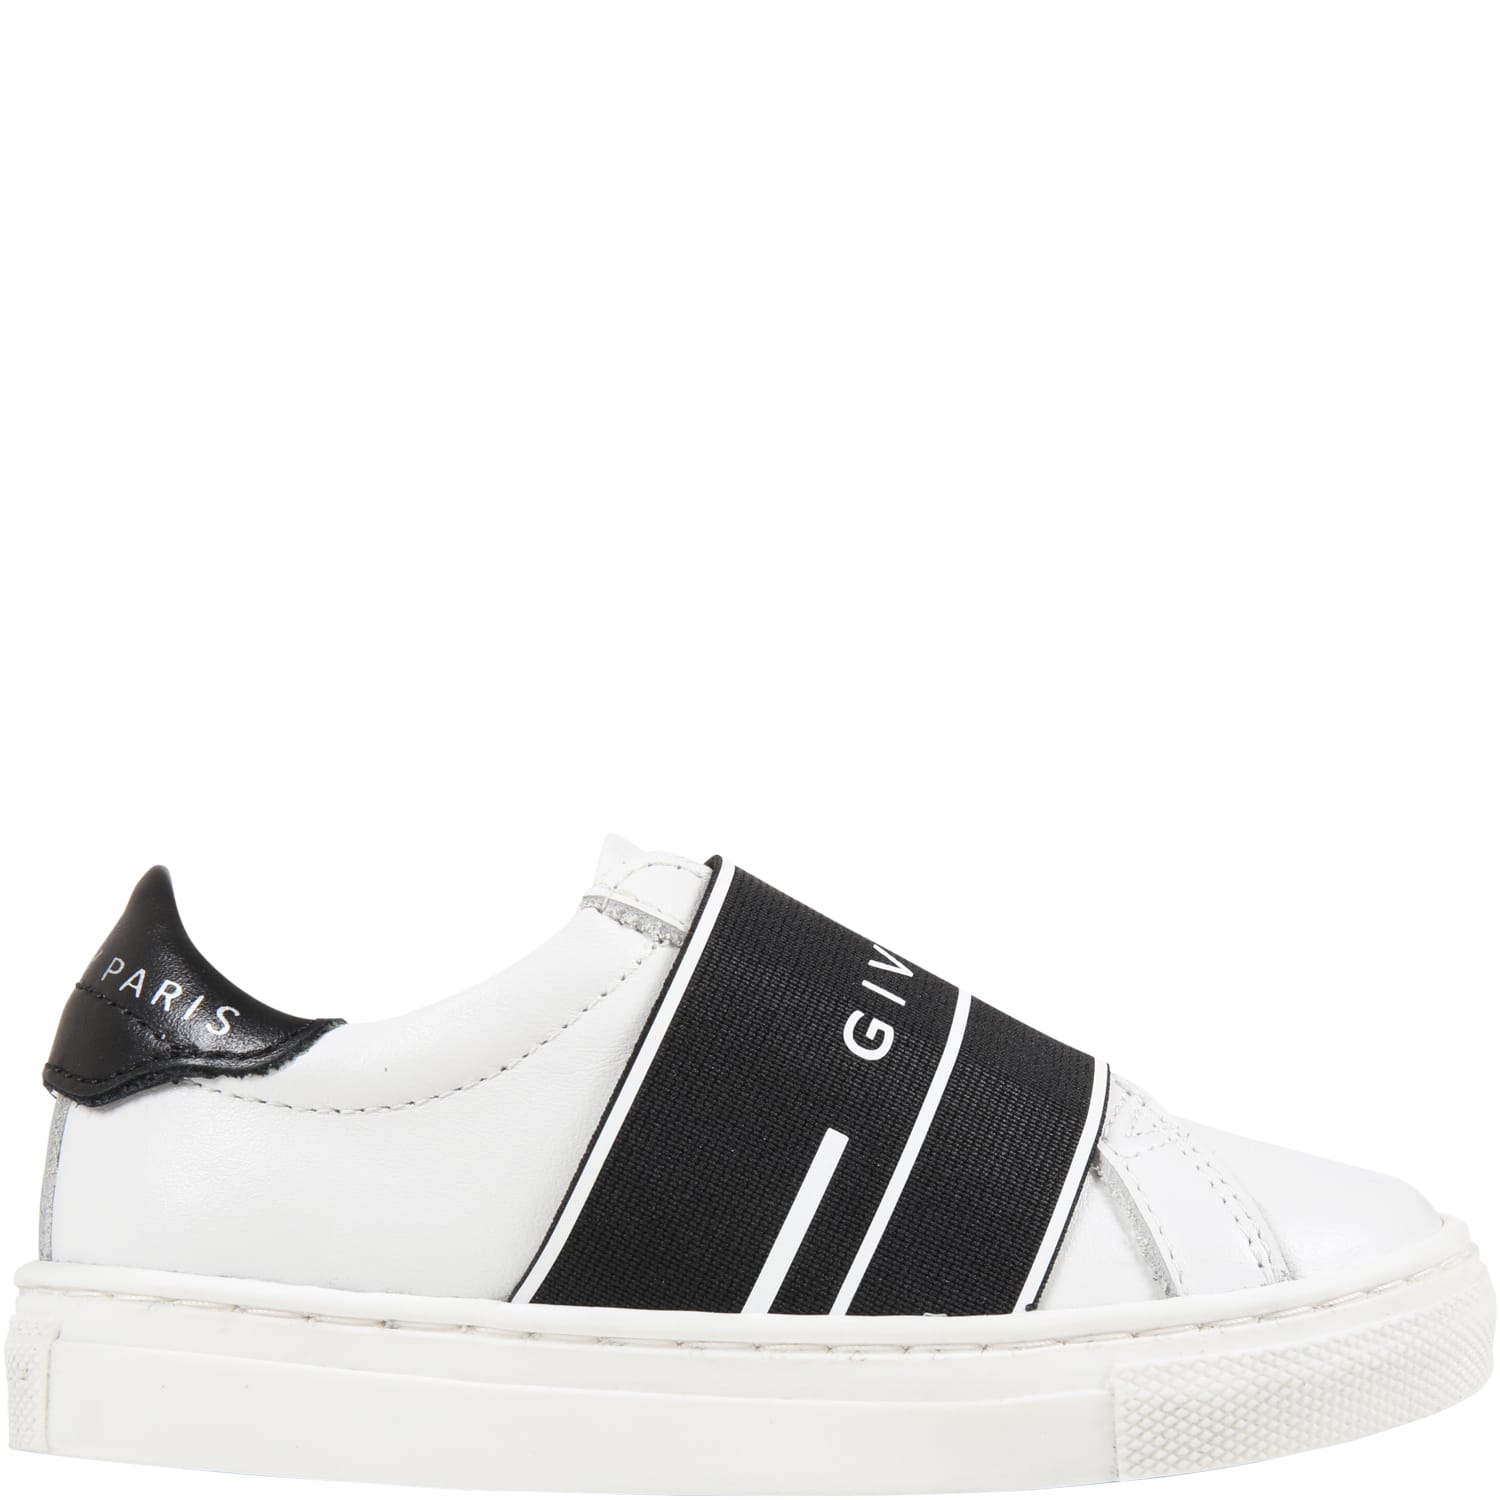 Buy Givenchy White Sneakers For Kids With Logo online, shop Givenchy shoes with free shipping